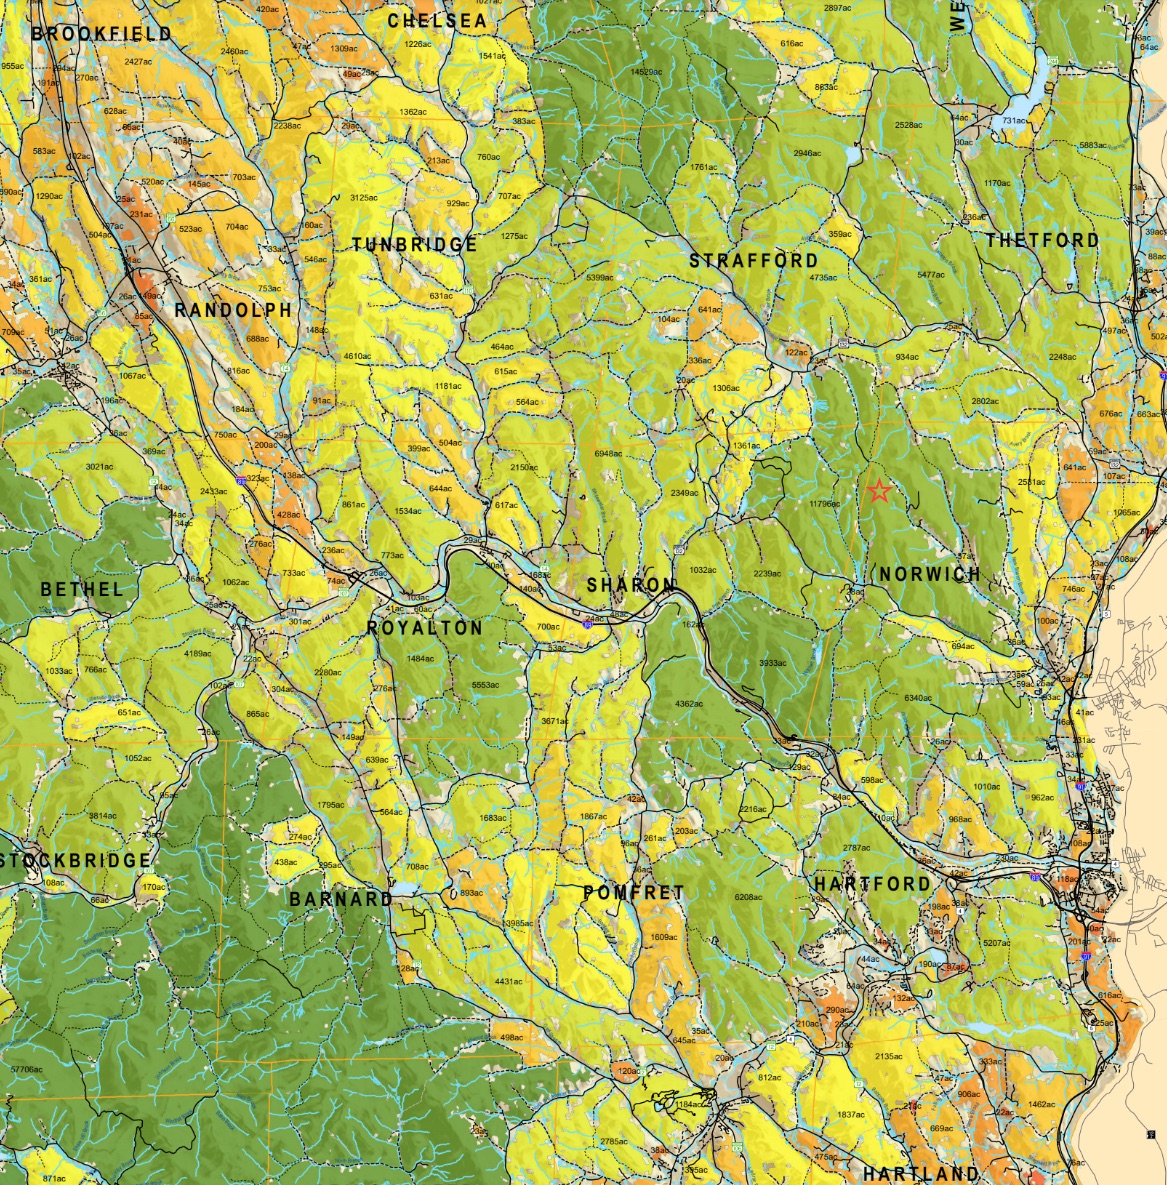 This map shows forested areas identified as higher priority for conservation in Norwich. If you own forest you would like to conserve, please contact the Norwich Conservation Commission for more information.